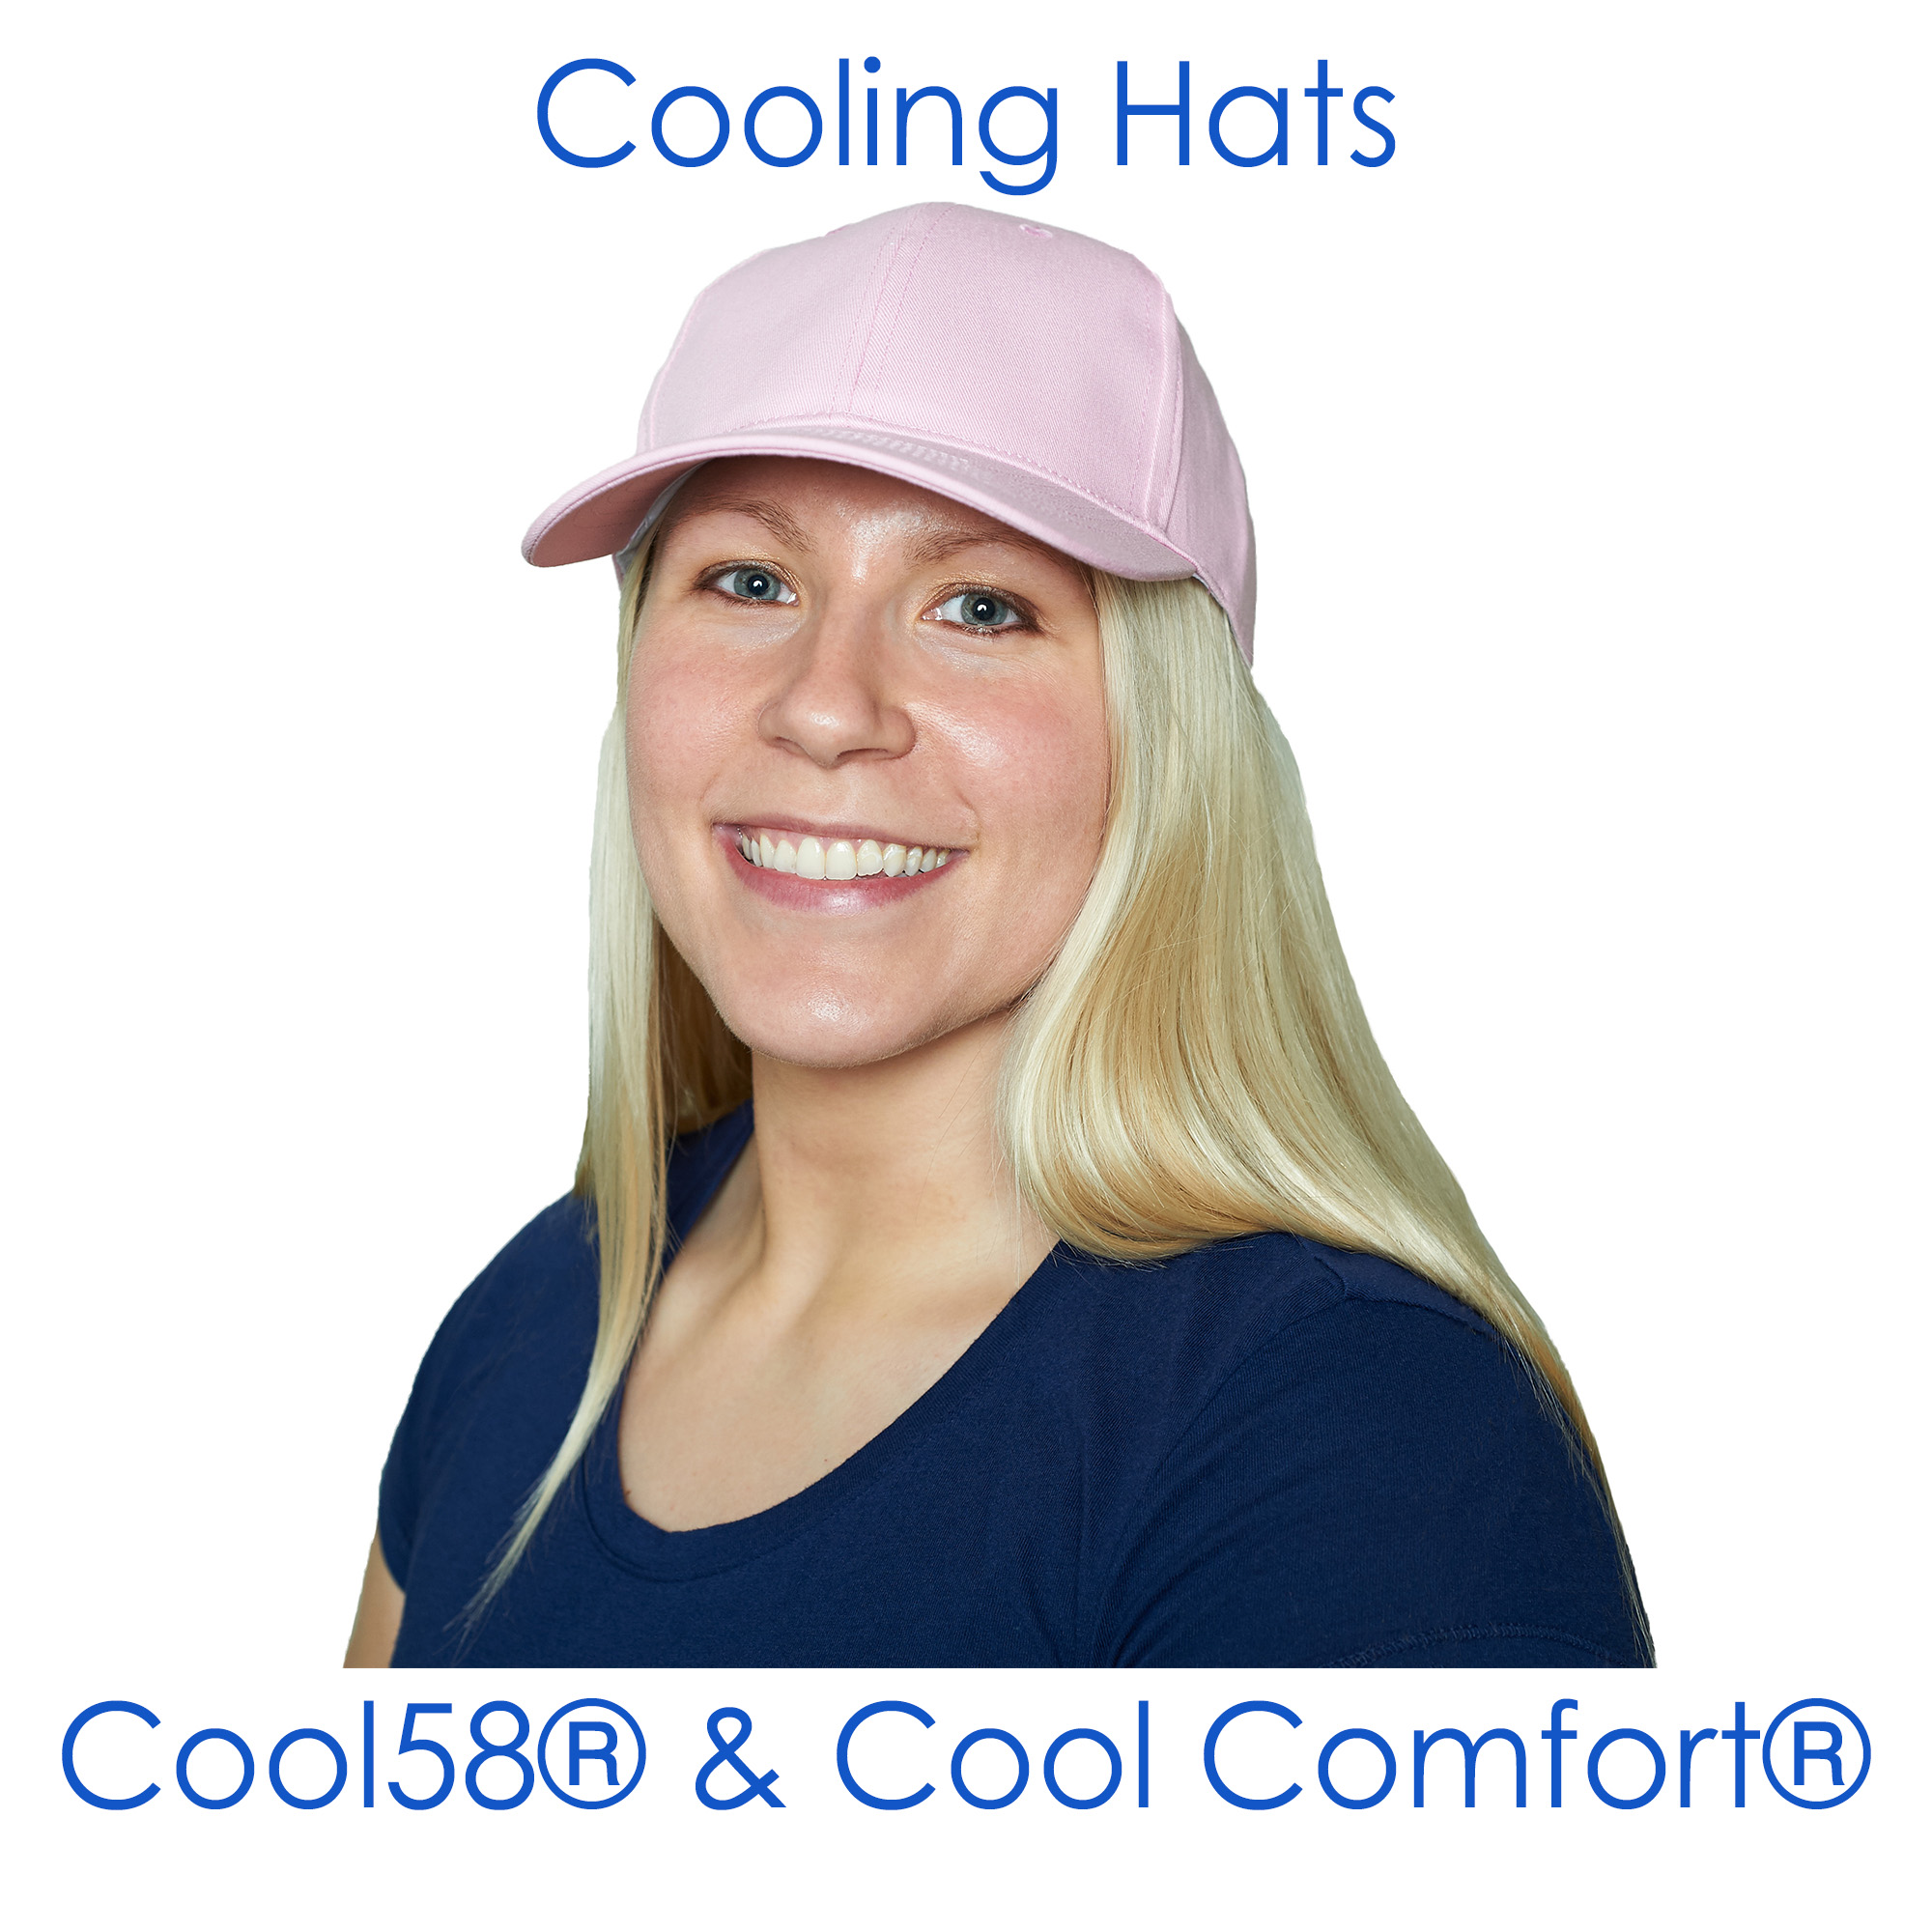 Woman wearing a pink baseball cap with words saying cooling hats cool58 and cool comfort